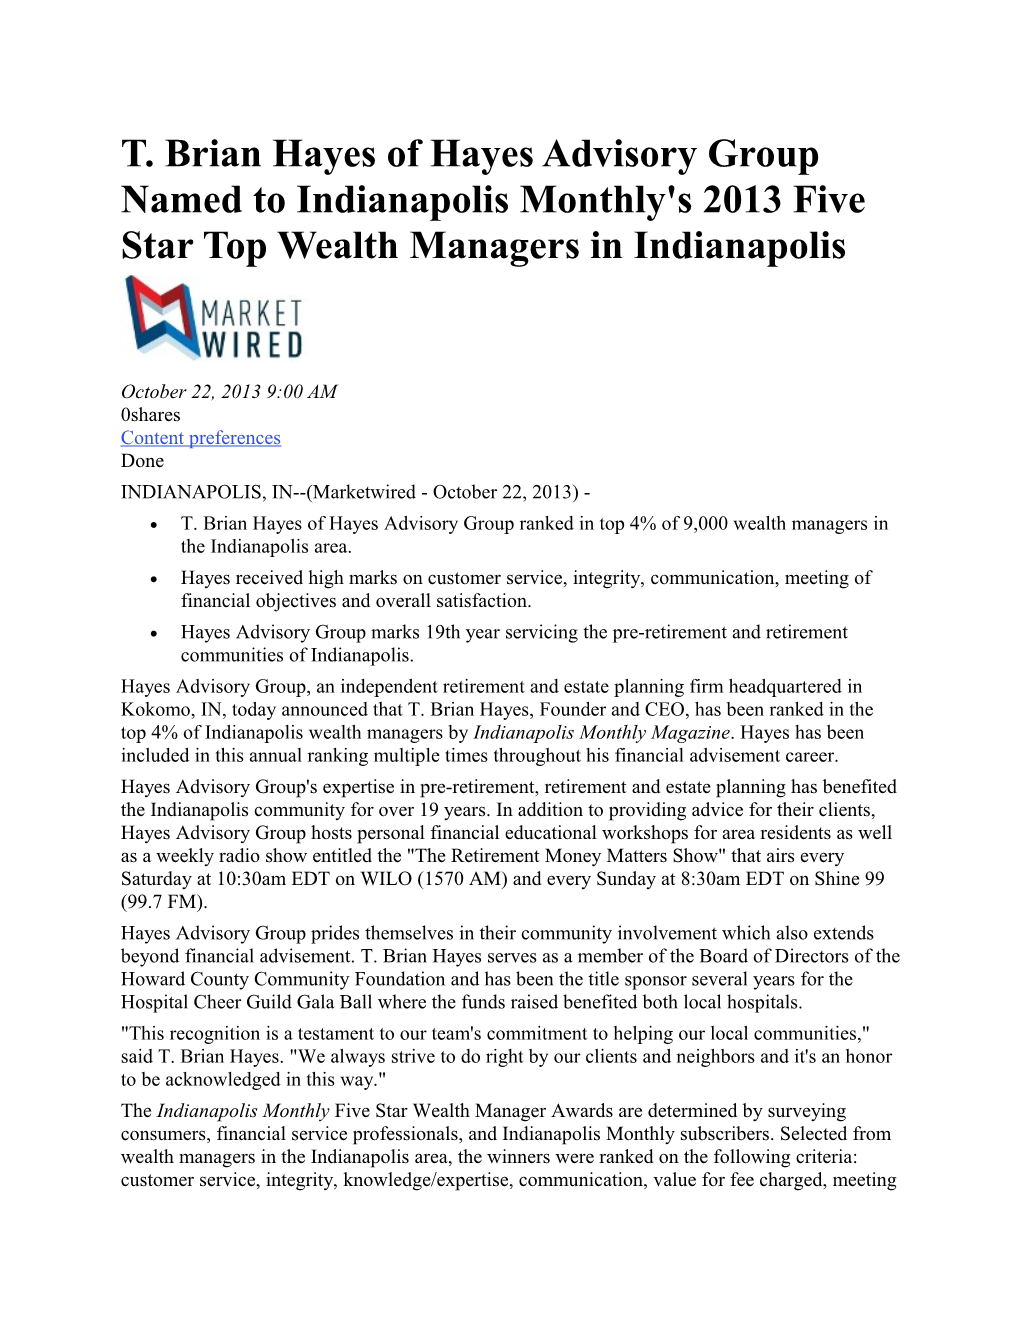 T. Brian Hayes of Hayes Advisory Group Named to Indianapolis Monthly's 2013 Five Star